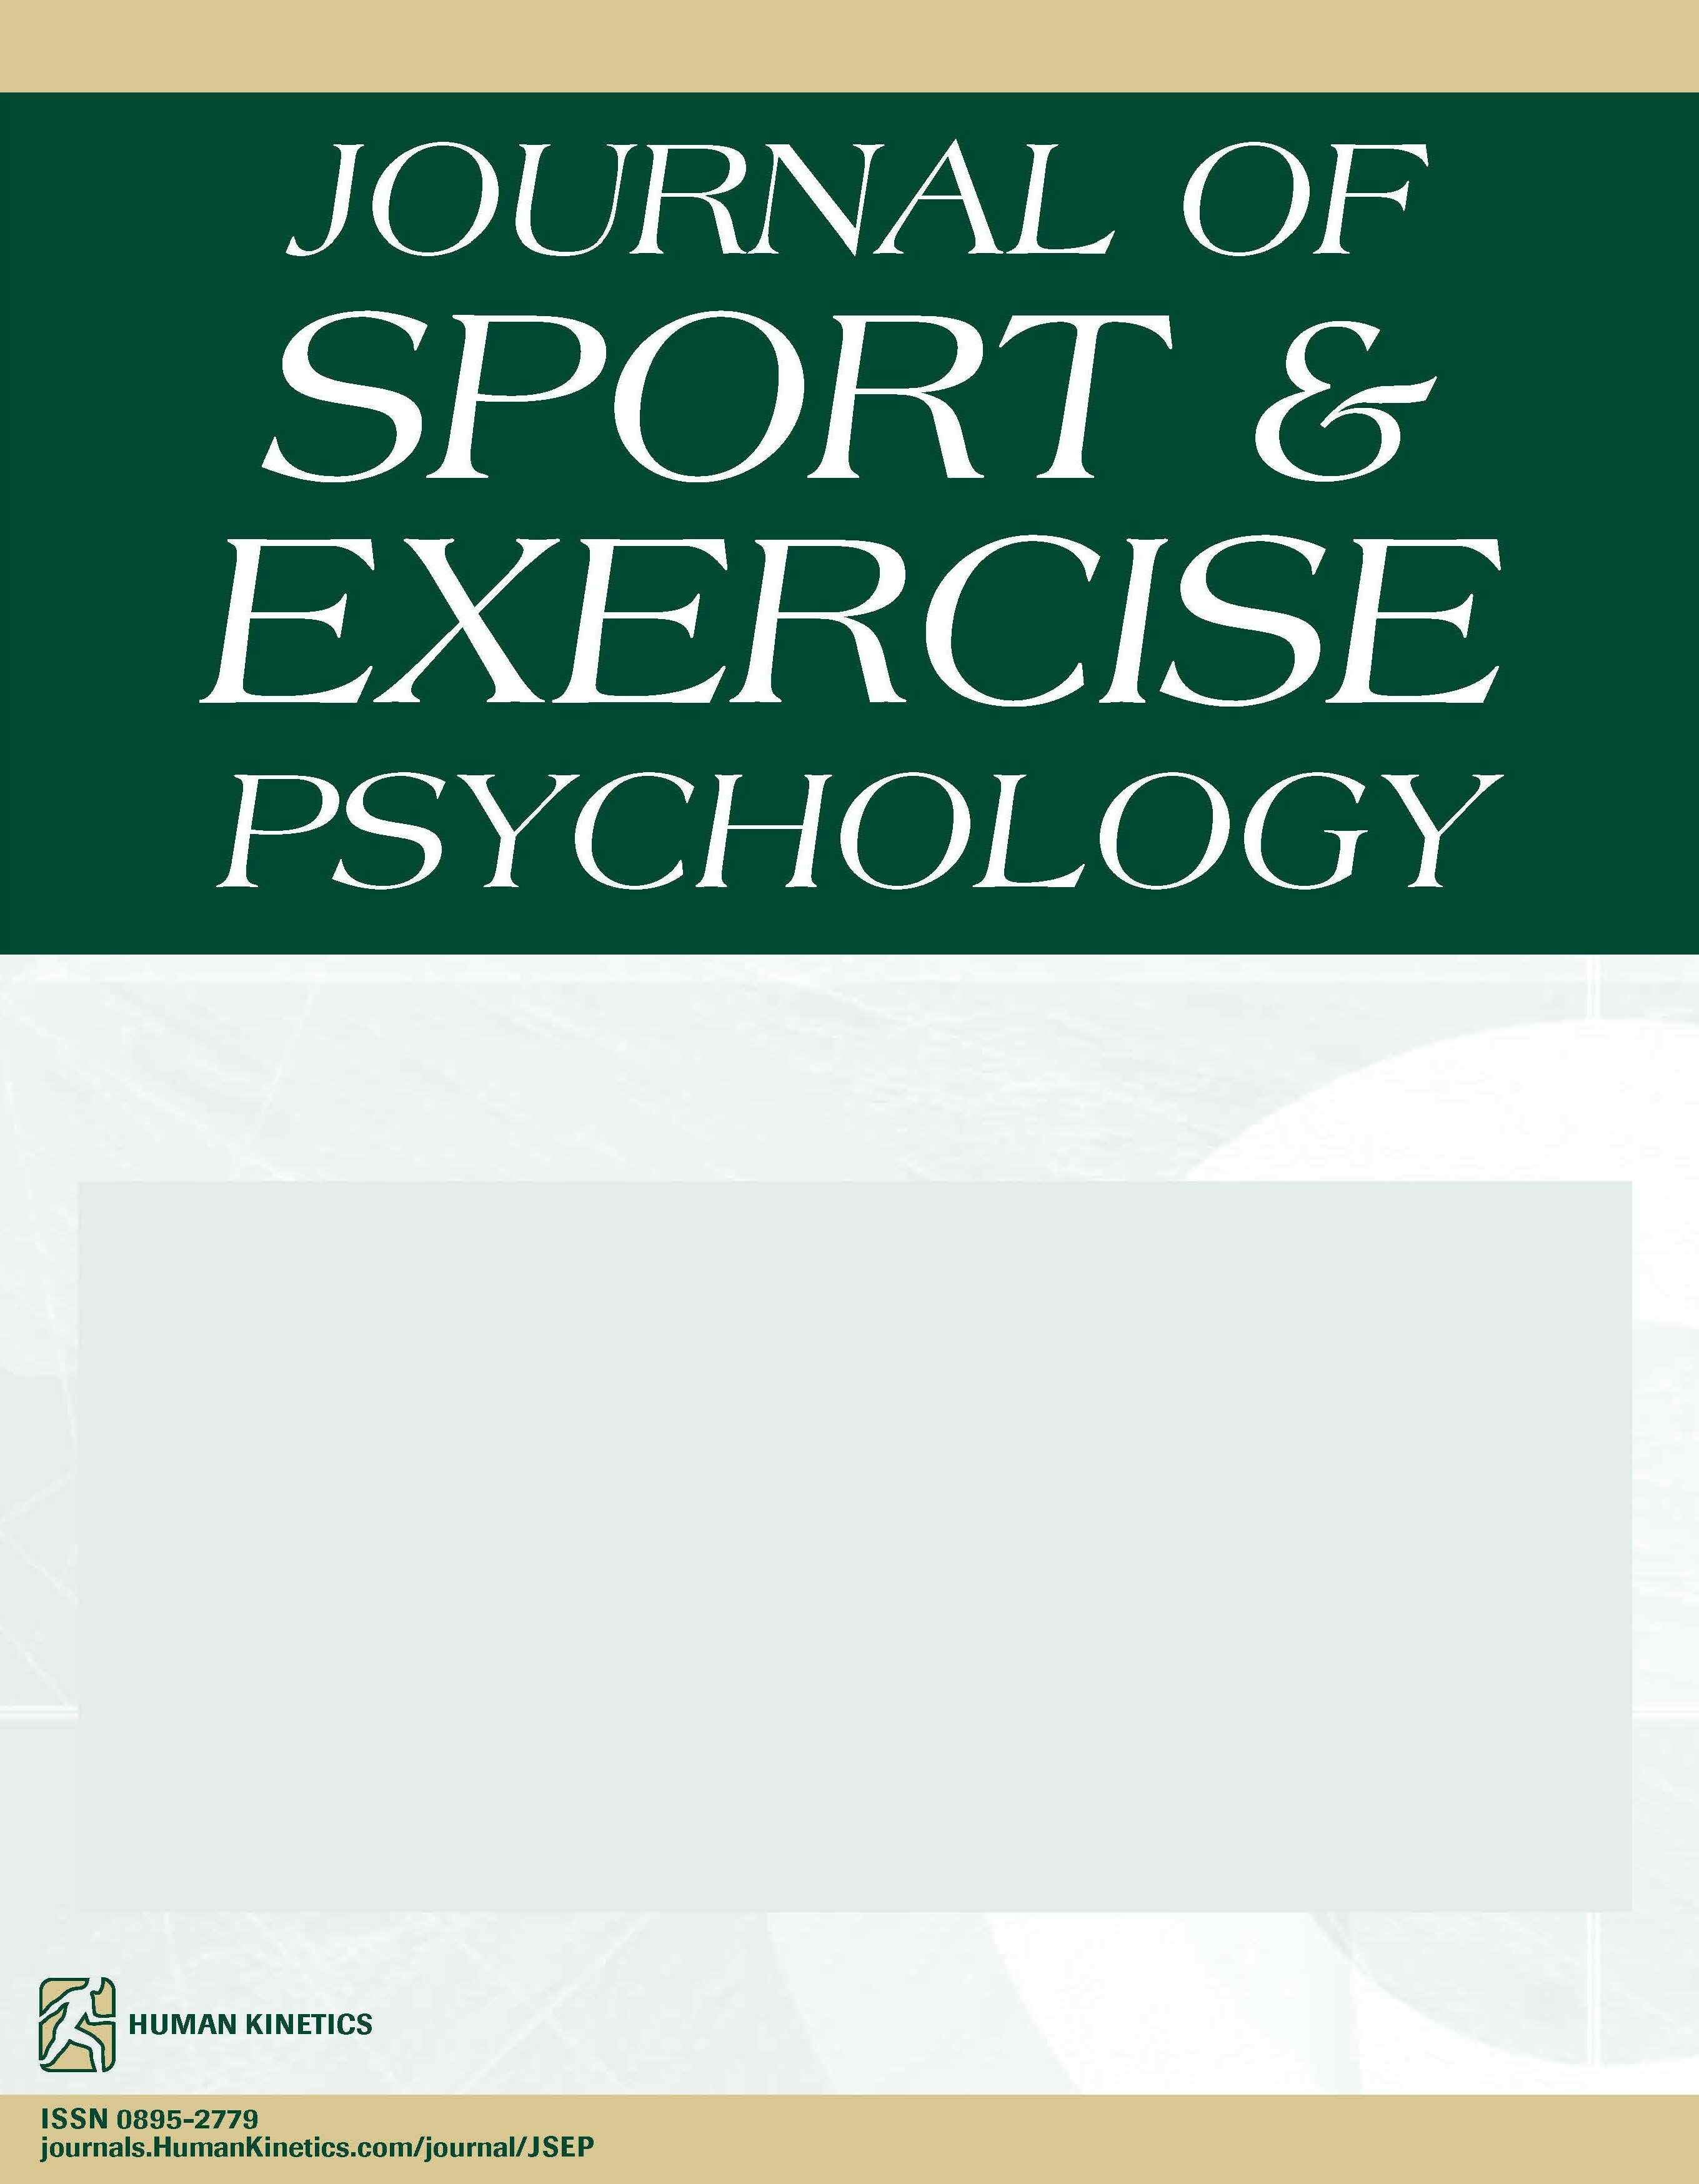 Effects of Acute Physical Fatigue on Gaze Behavior in Expert Badminton Players